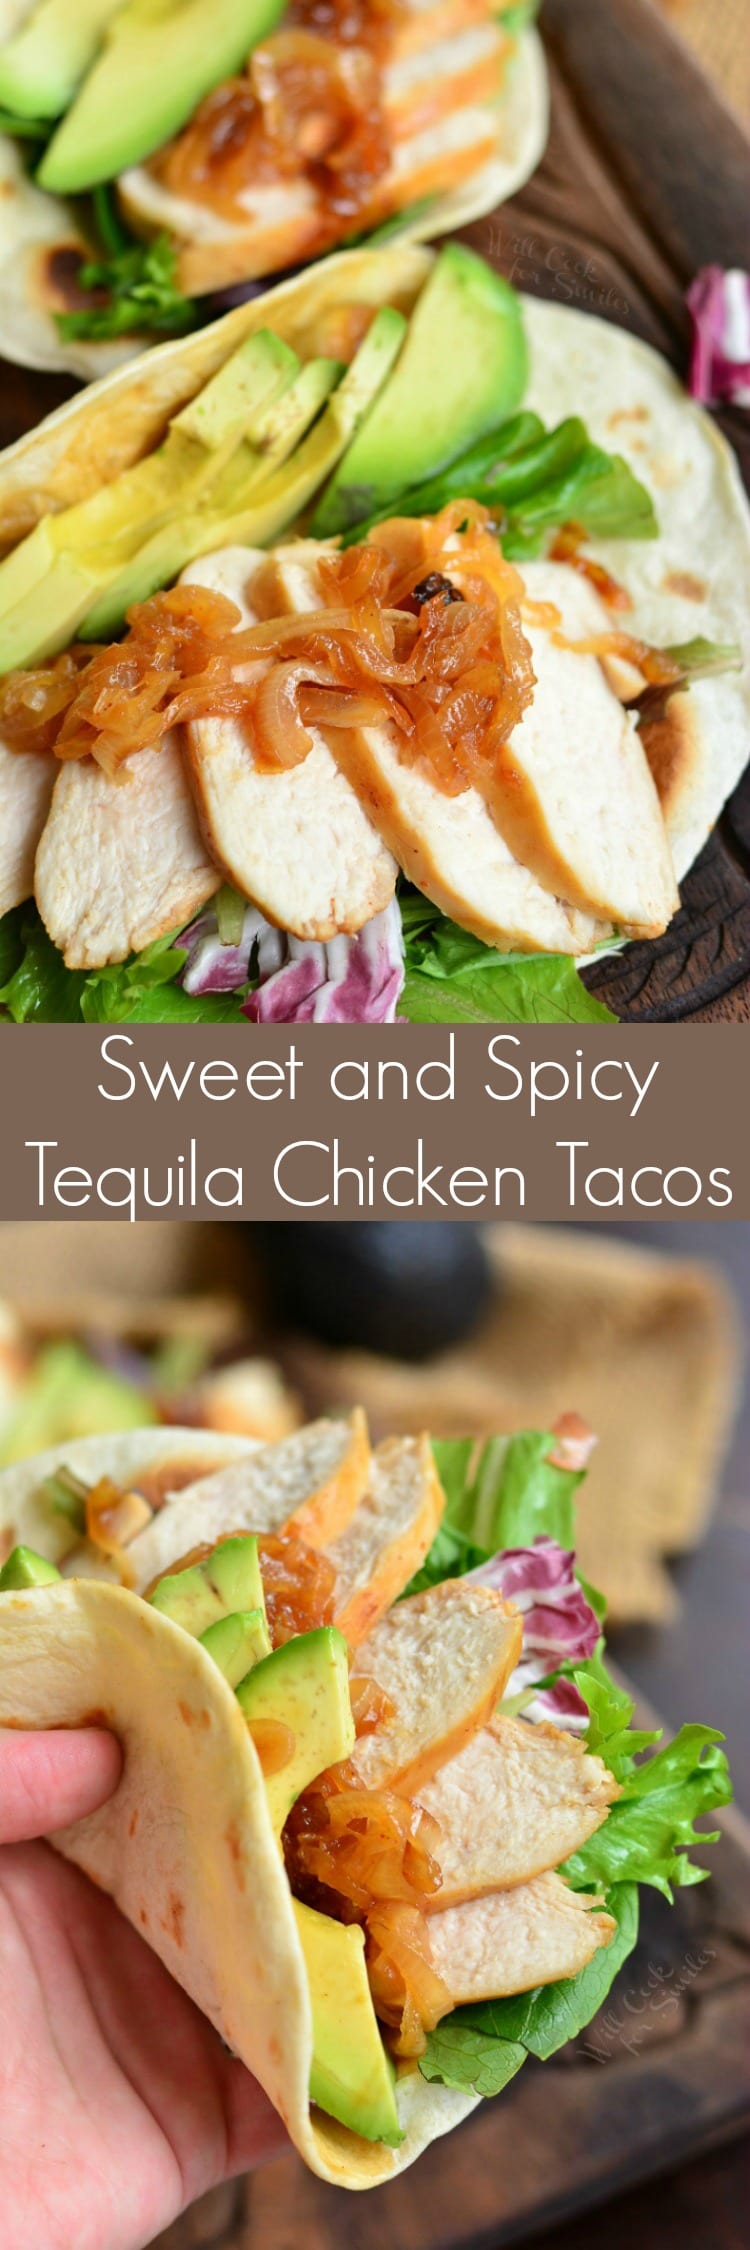 Sweet and Spicy Tequila Chicken Tacos collage 